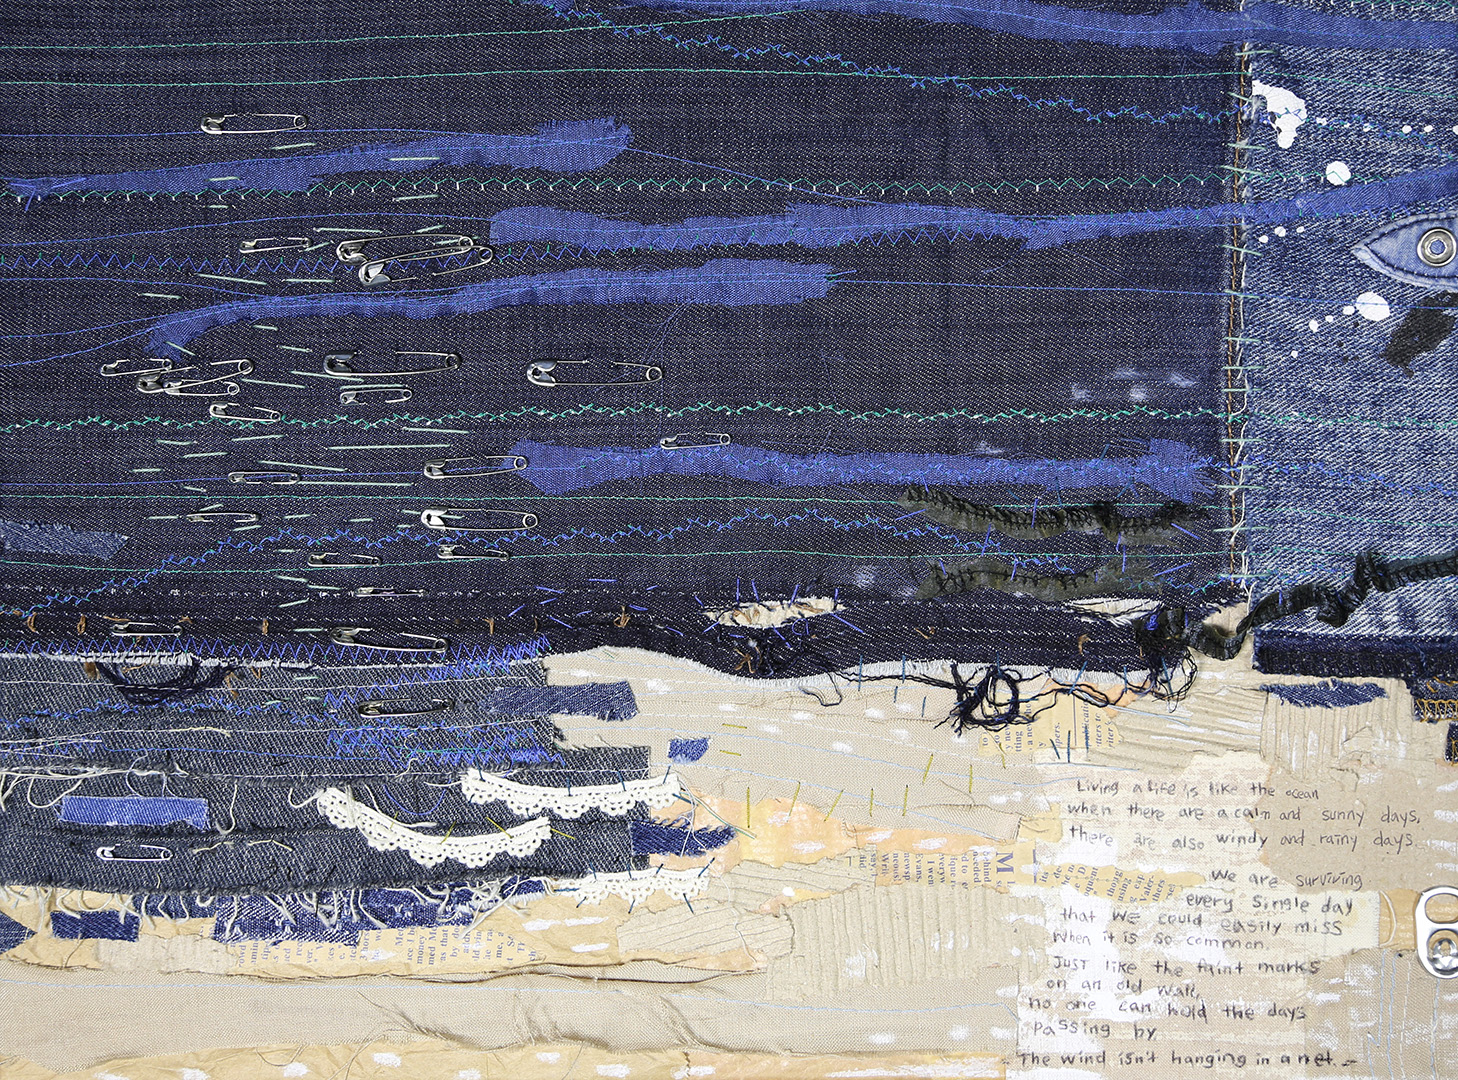 Exhibition from the Rothko Centre’s textile art collection available in Balvi